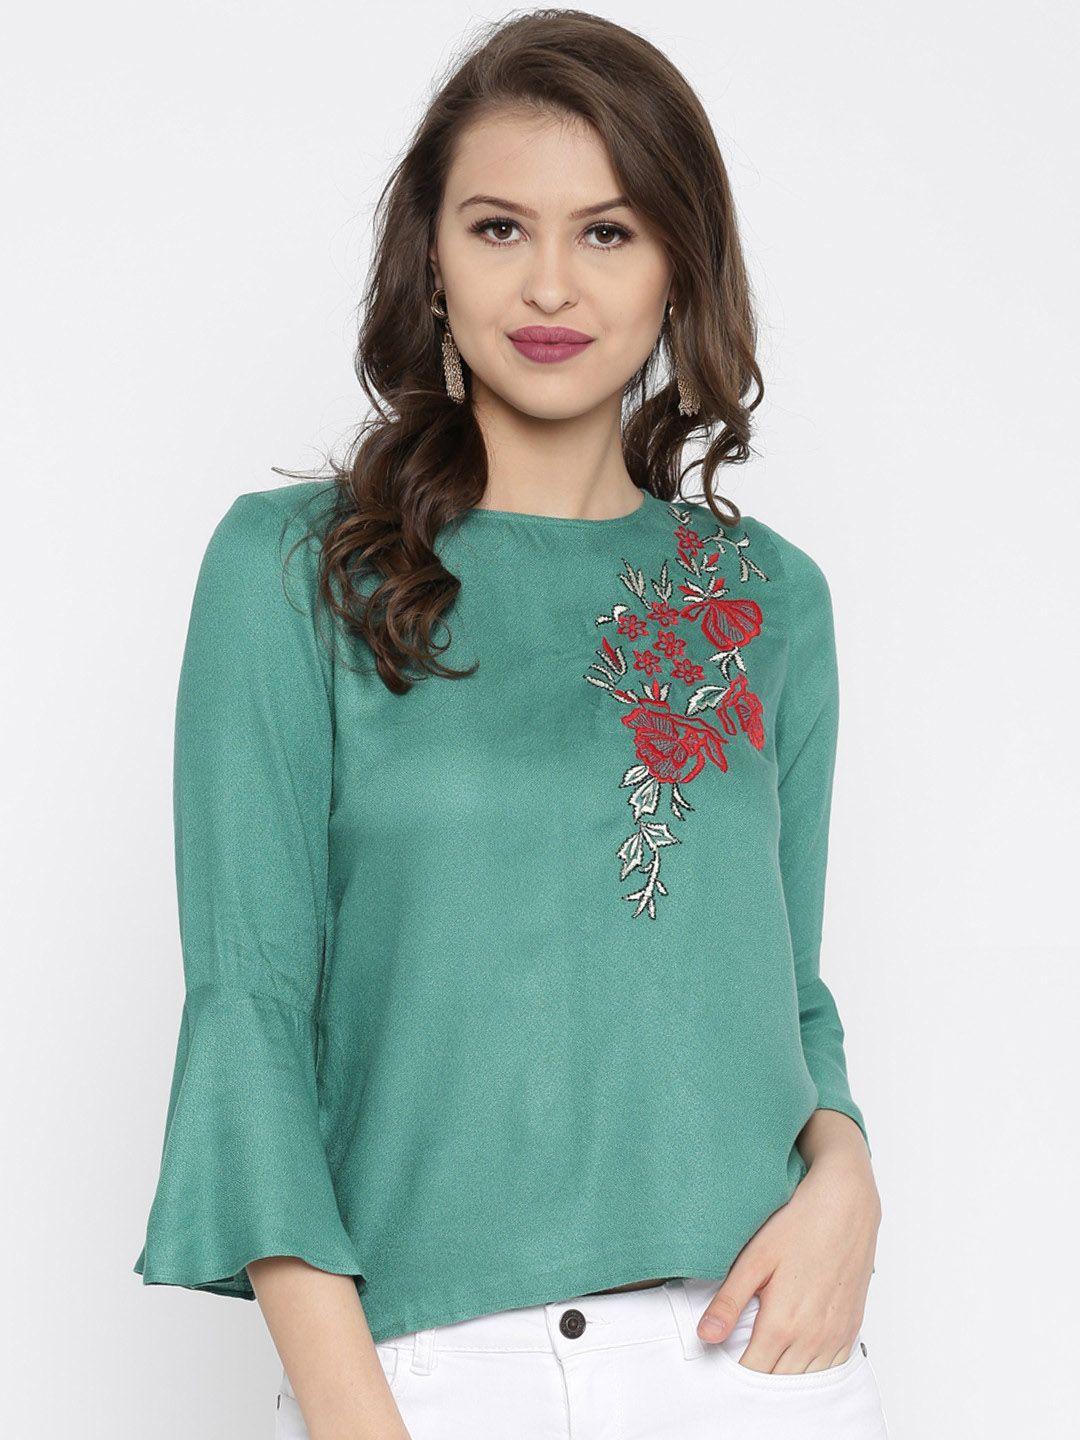 rare teal green embroidered top